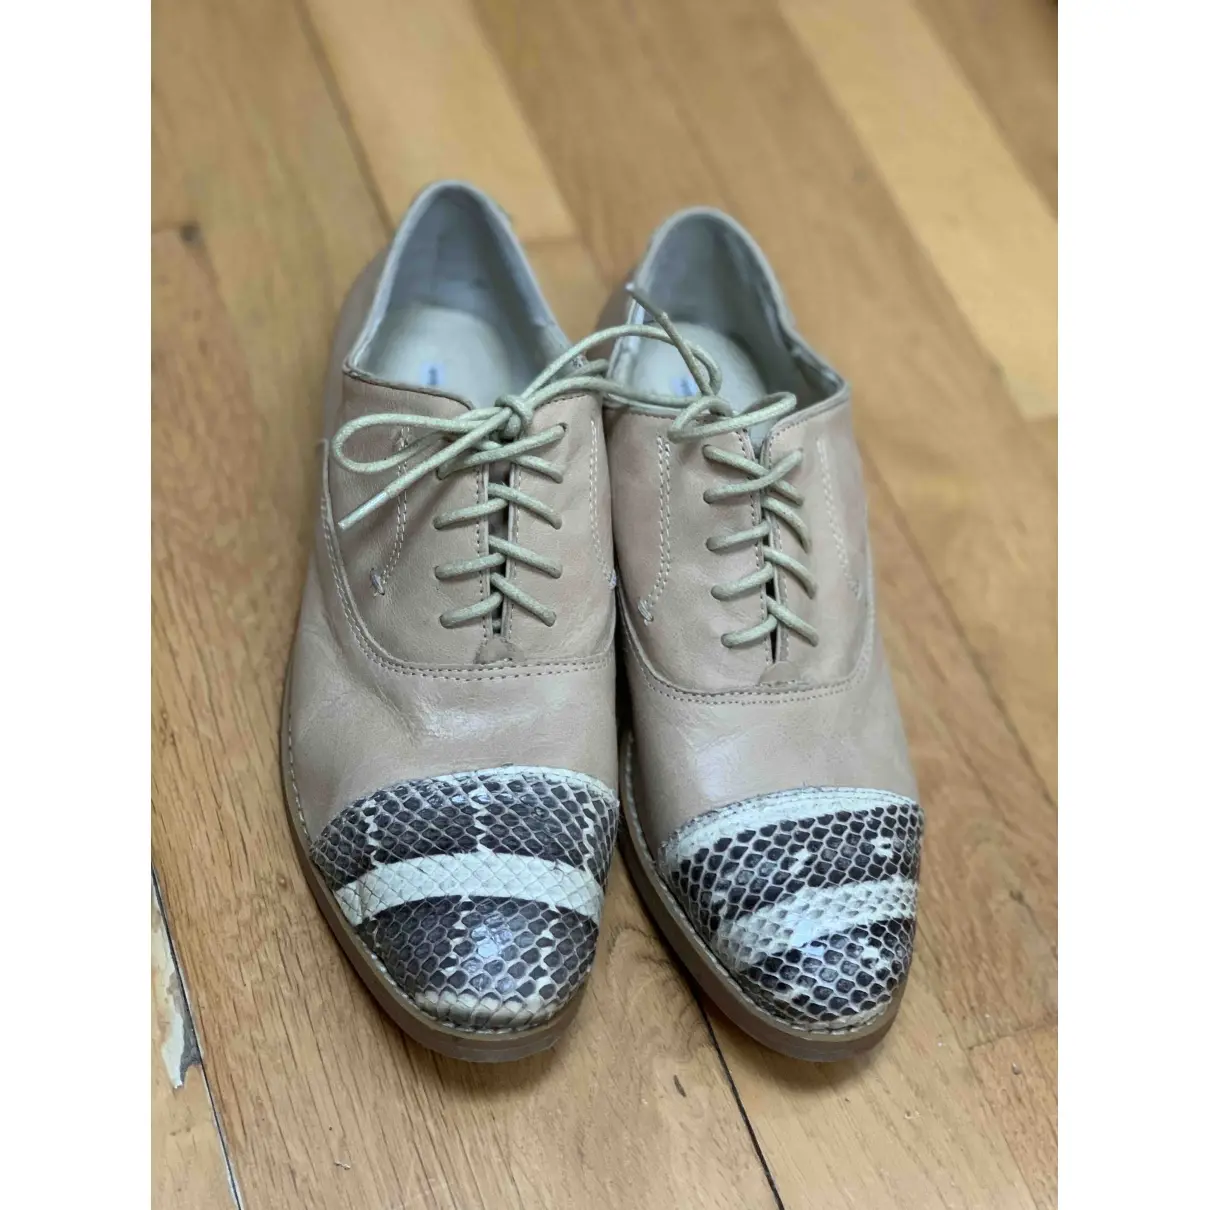 Windsor Smith Leather lace ups for sale